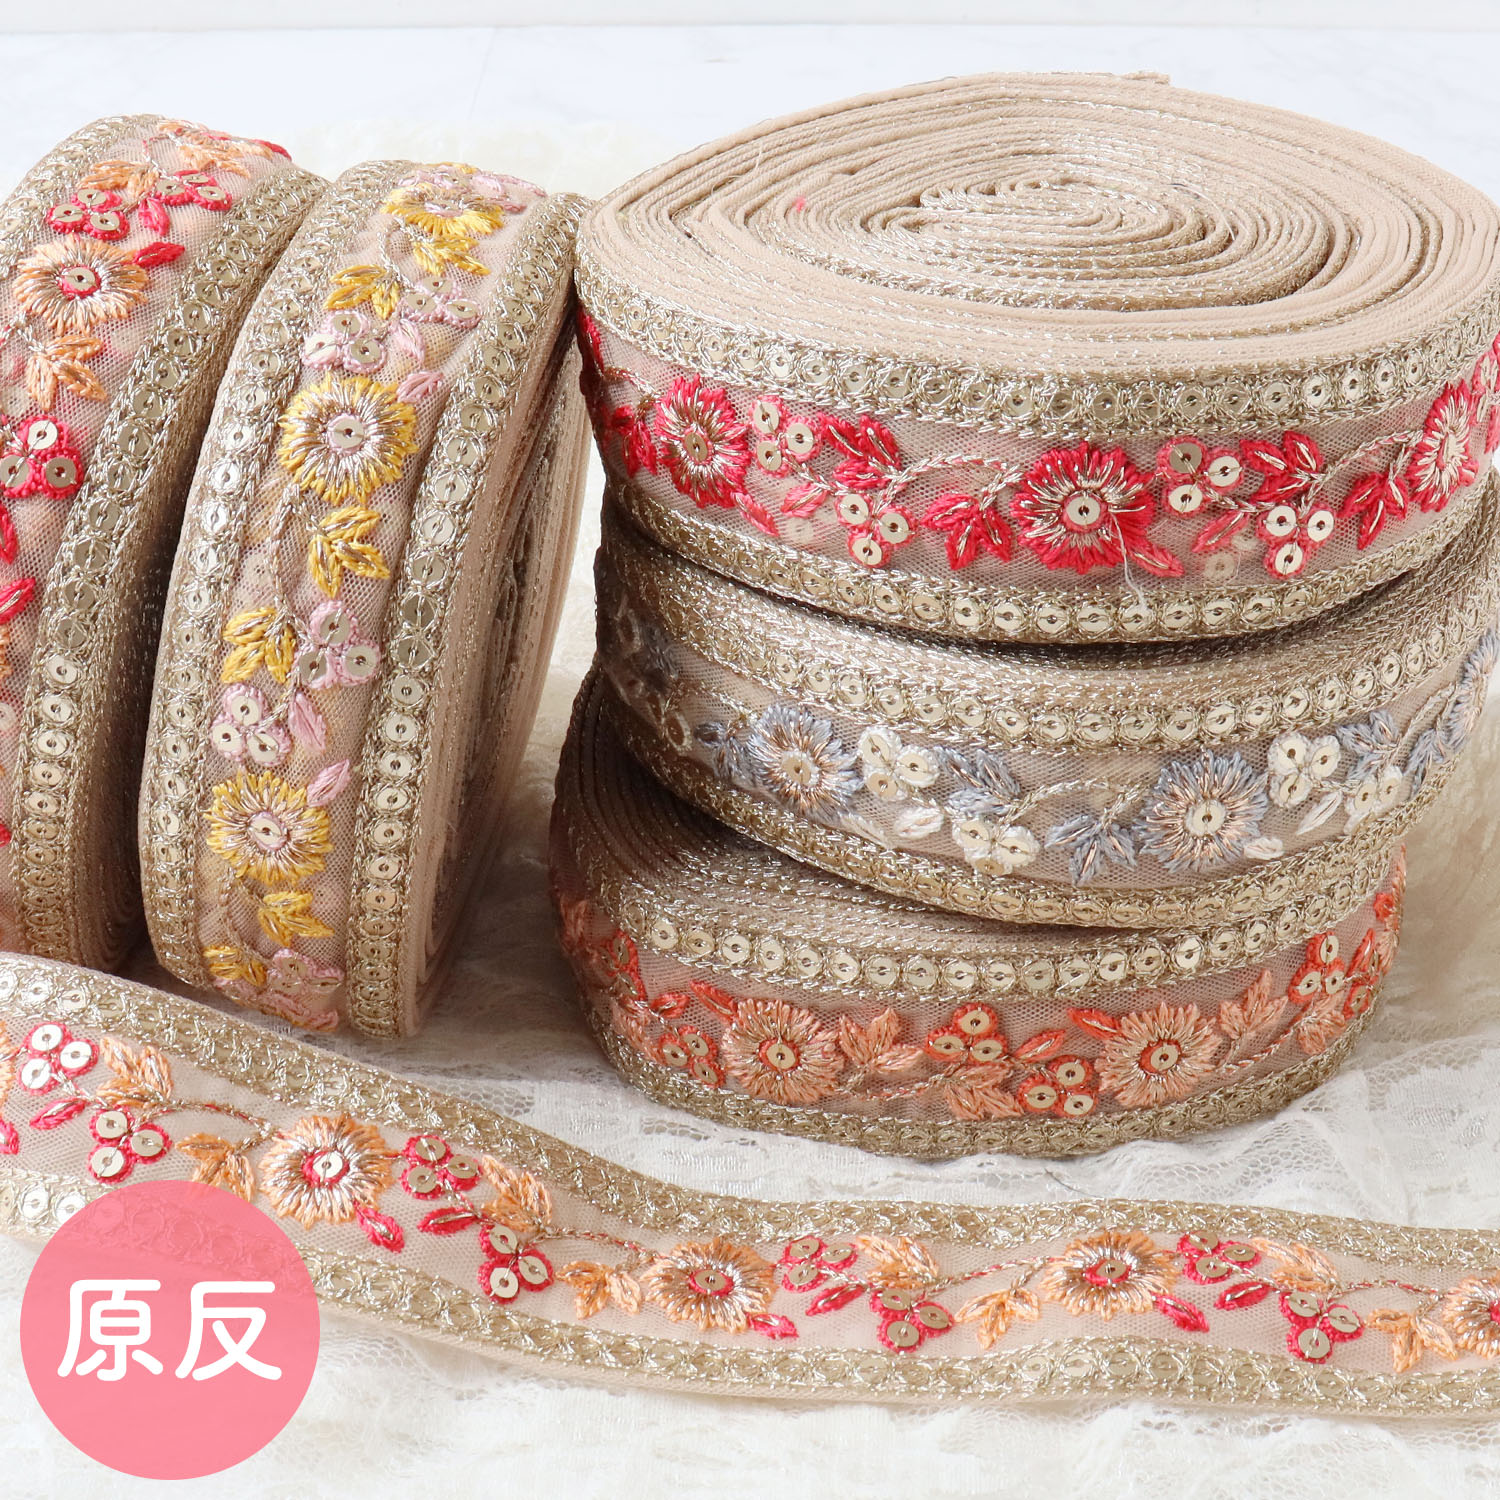 KGKF-R43360 Indian embroidery ribbon, Bolt approx.9m (roll)